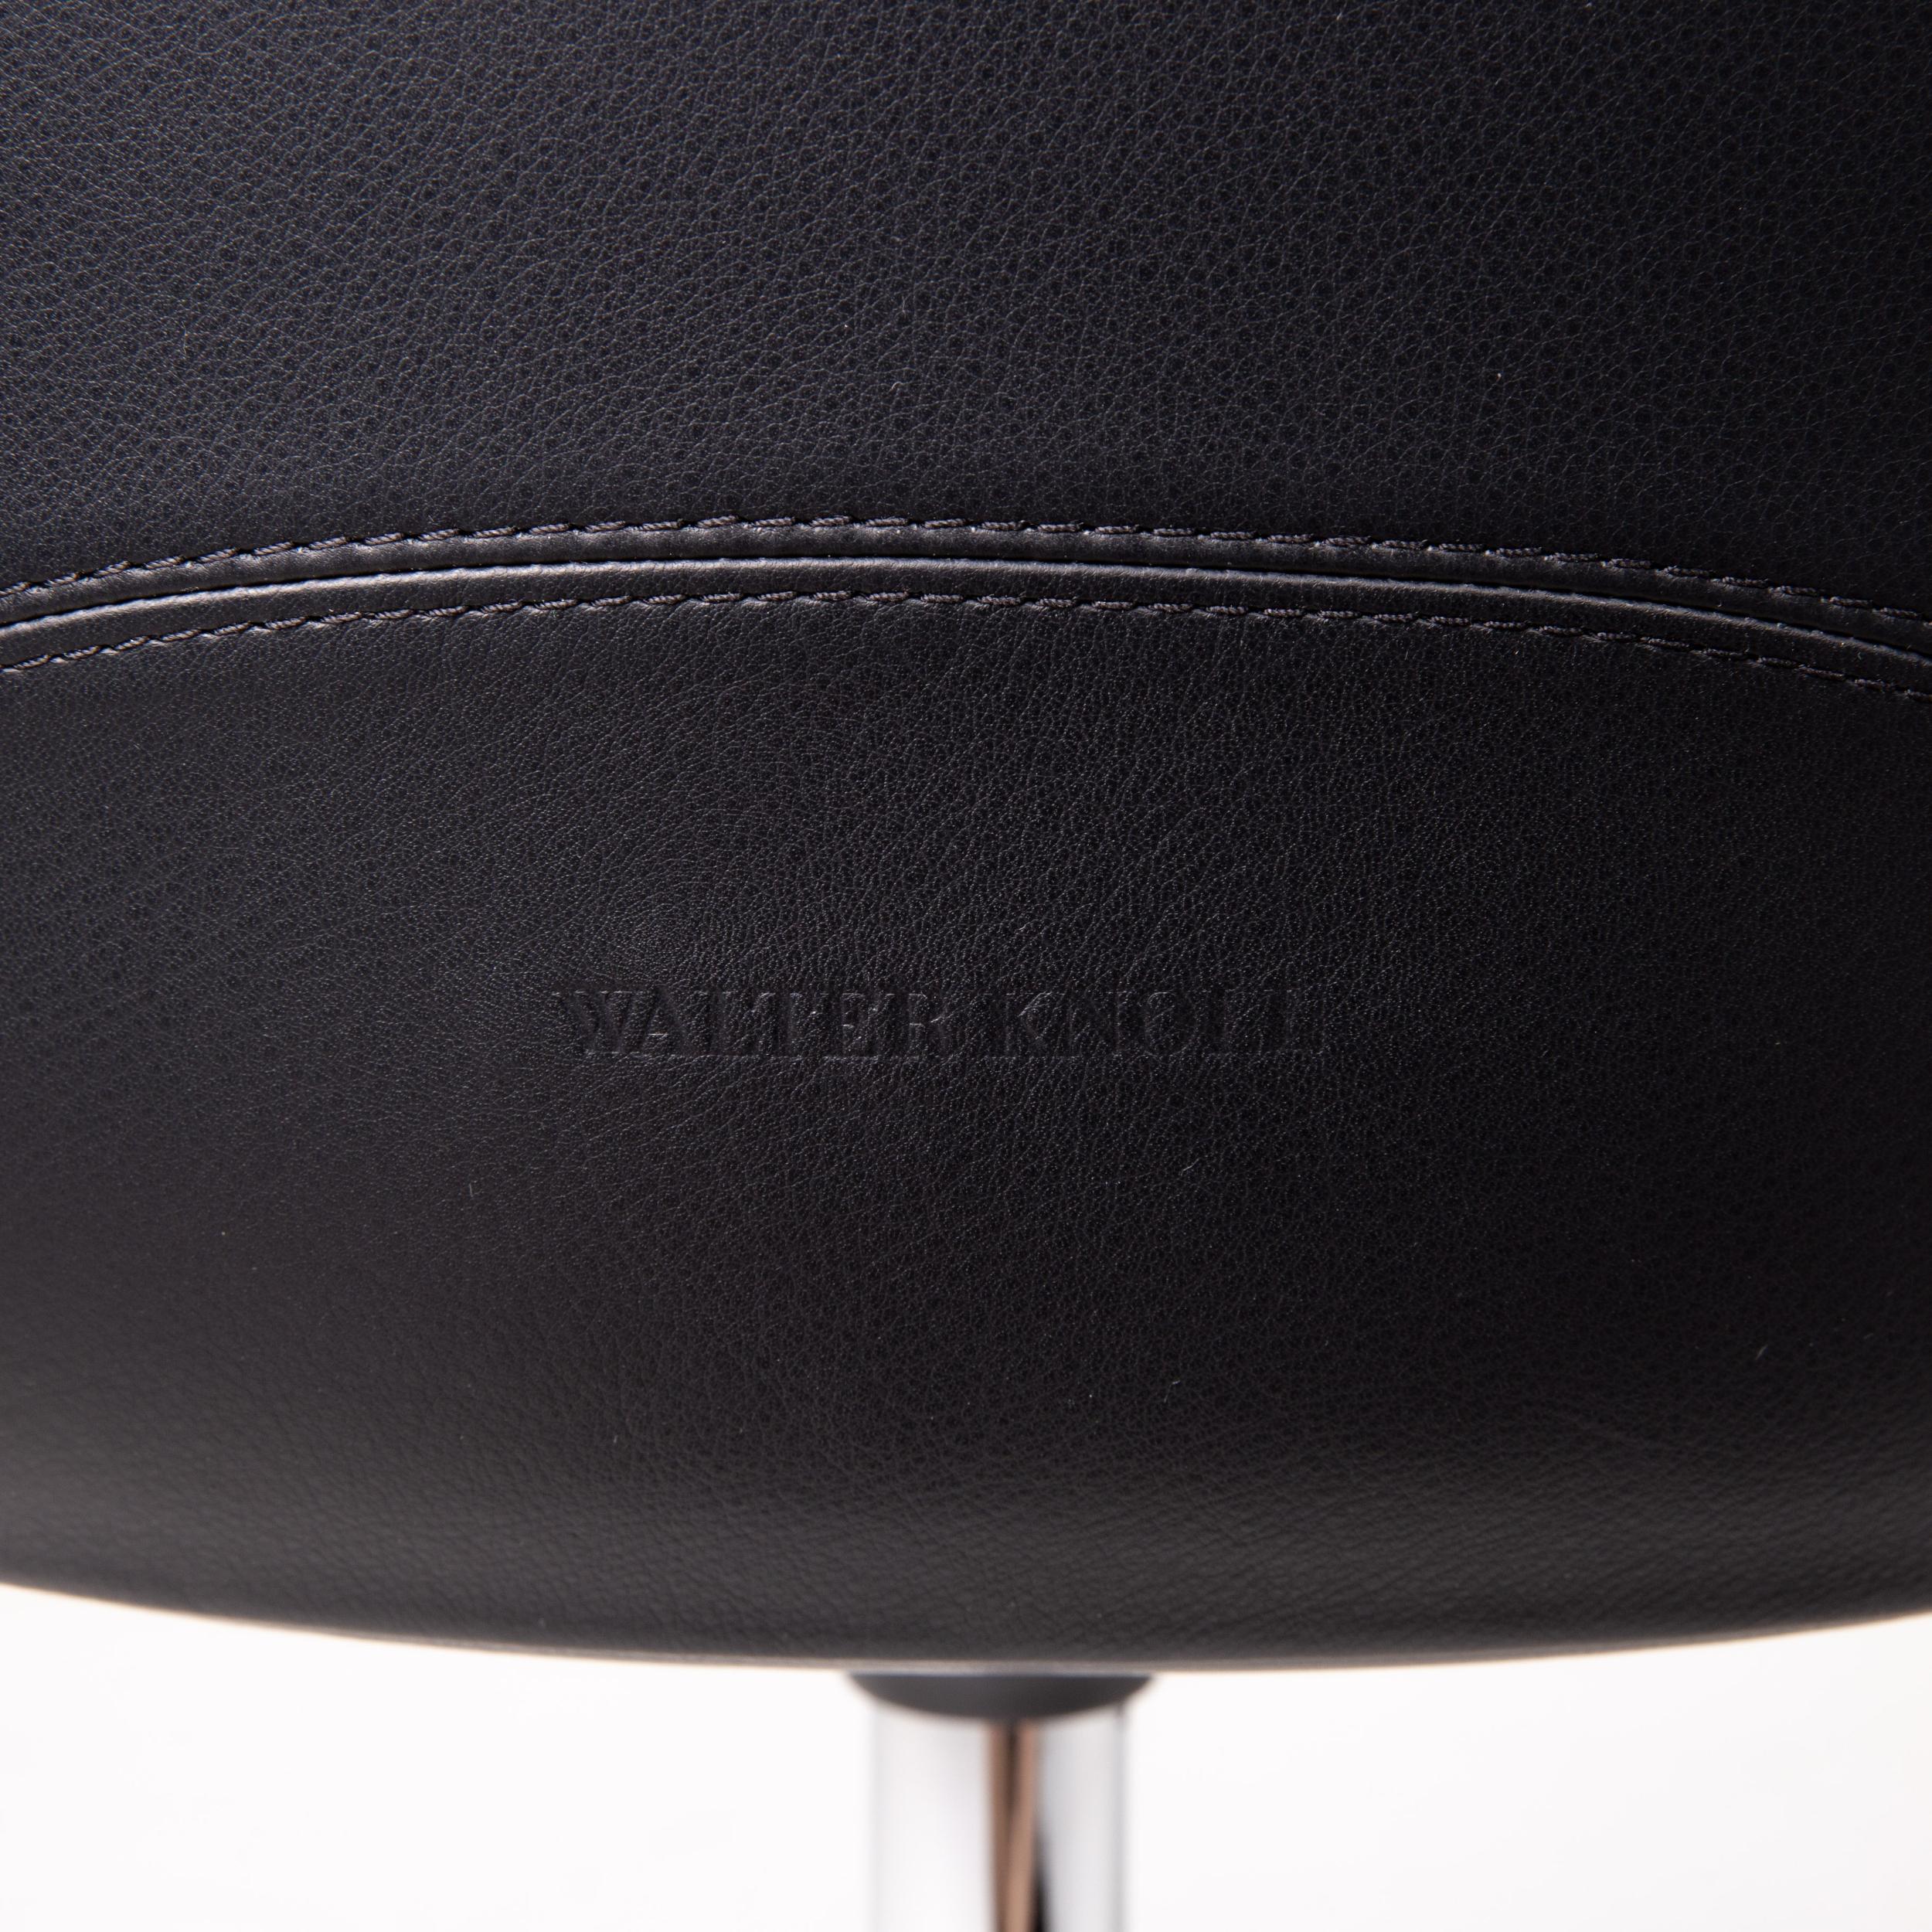 Walter Knoll Kyo Leather Armchair Black Chair Swivel In Good Condition For Sale In Cologne, DE